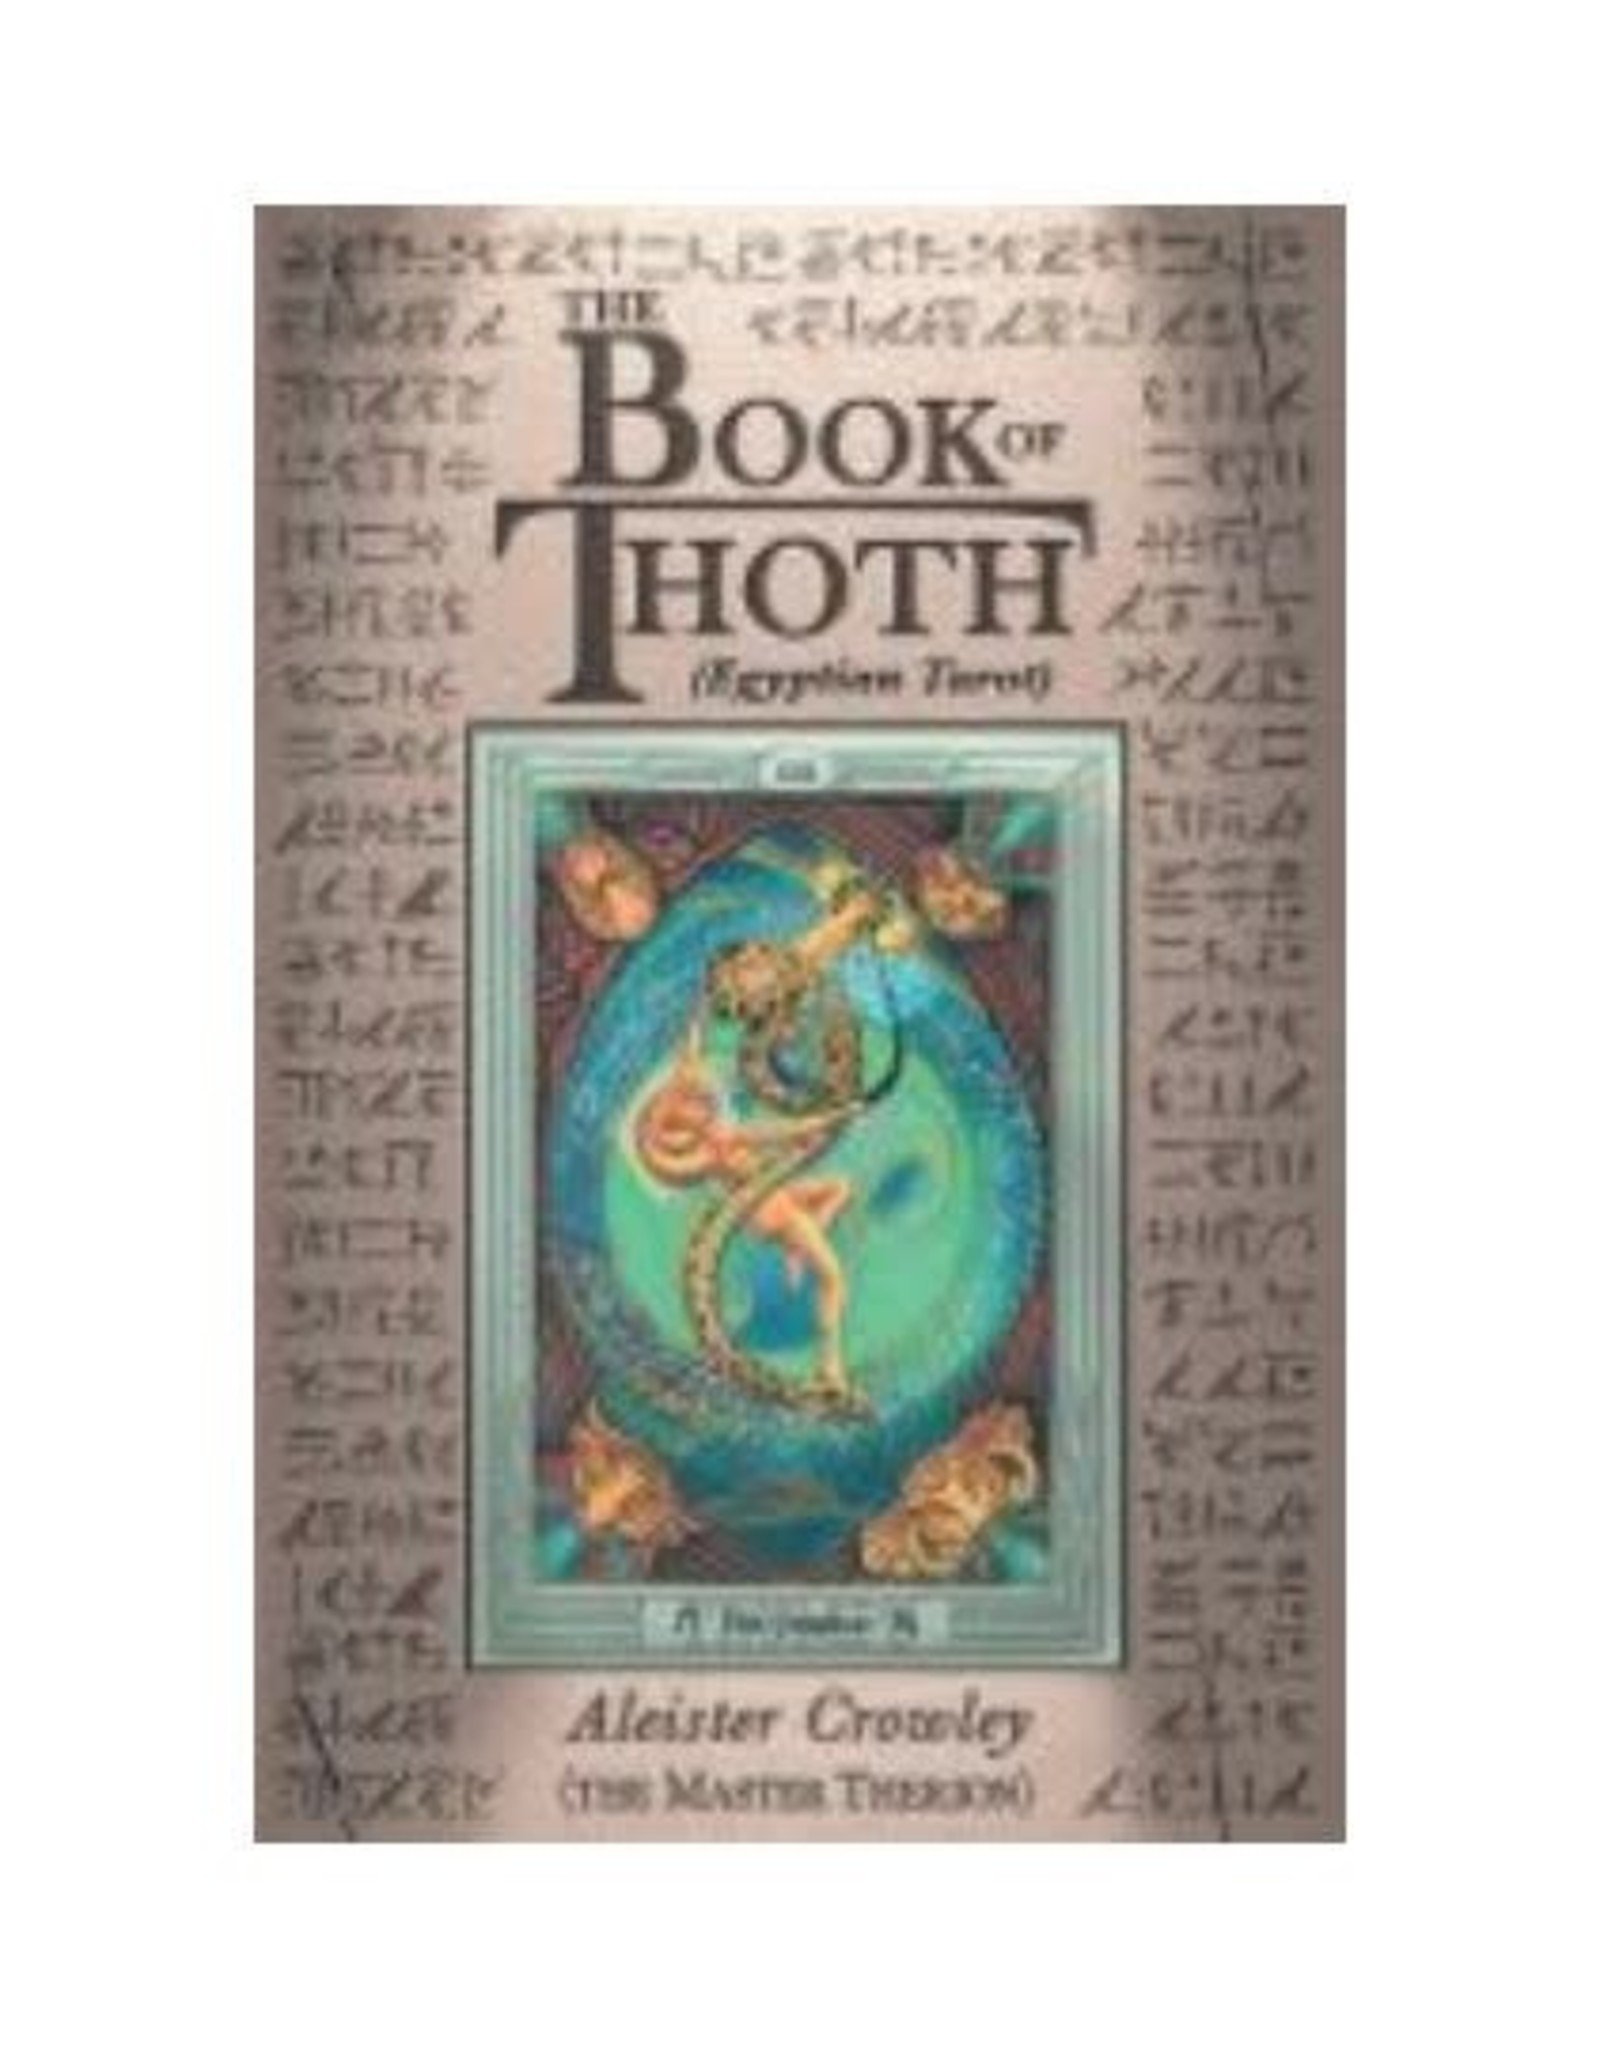 Book of Thoth Egyptian Tarot by Aleister Crowley